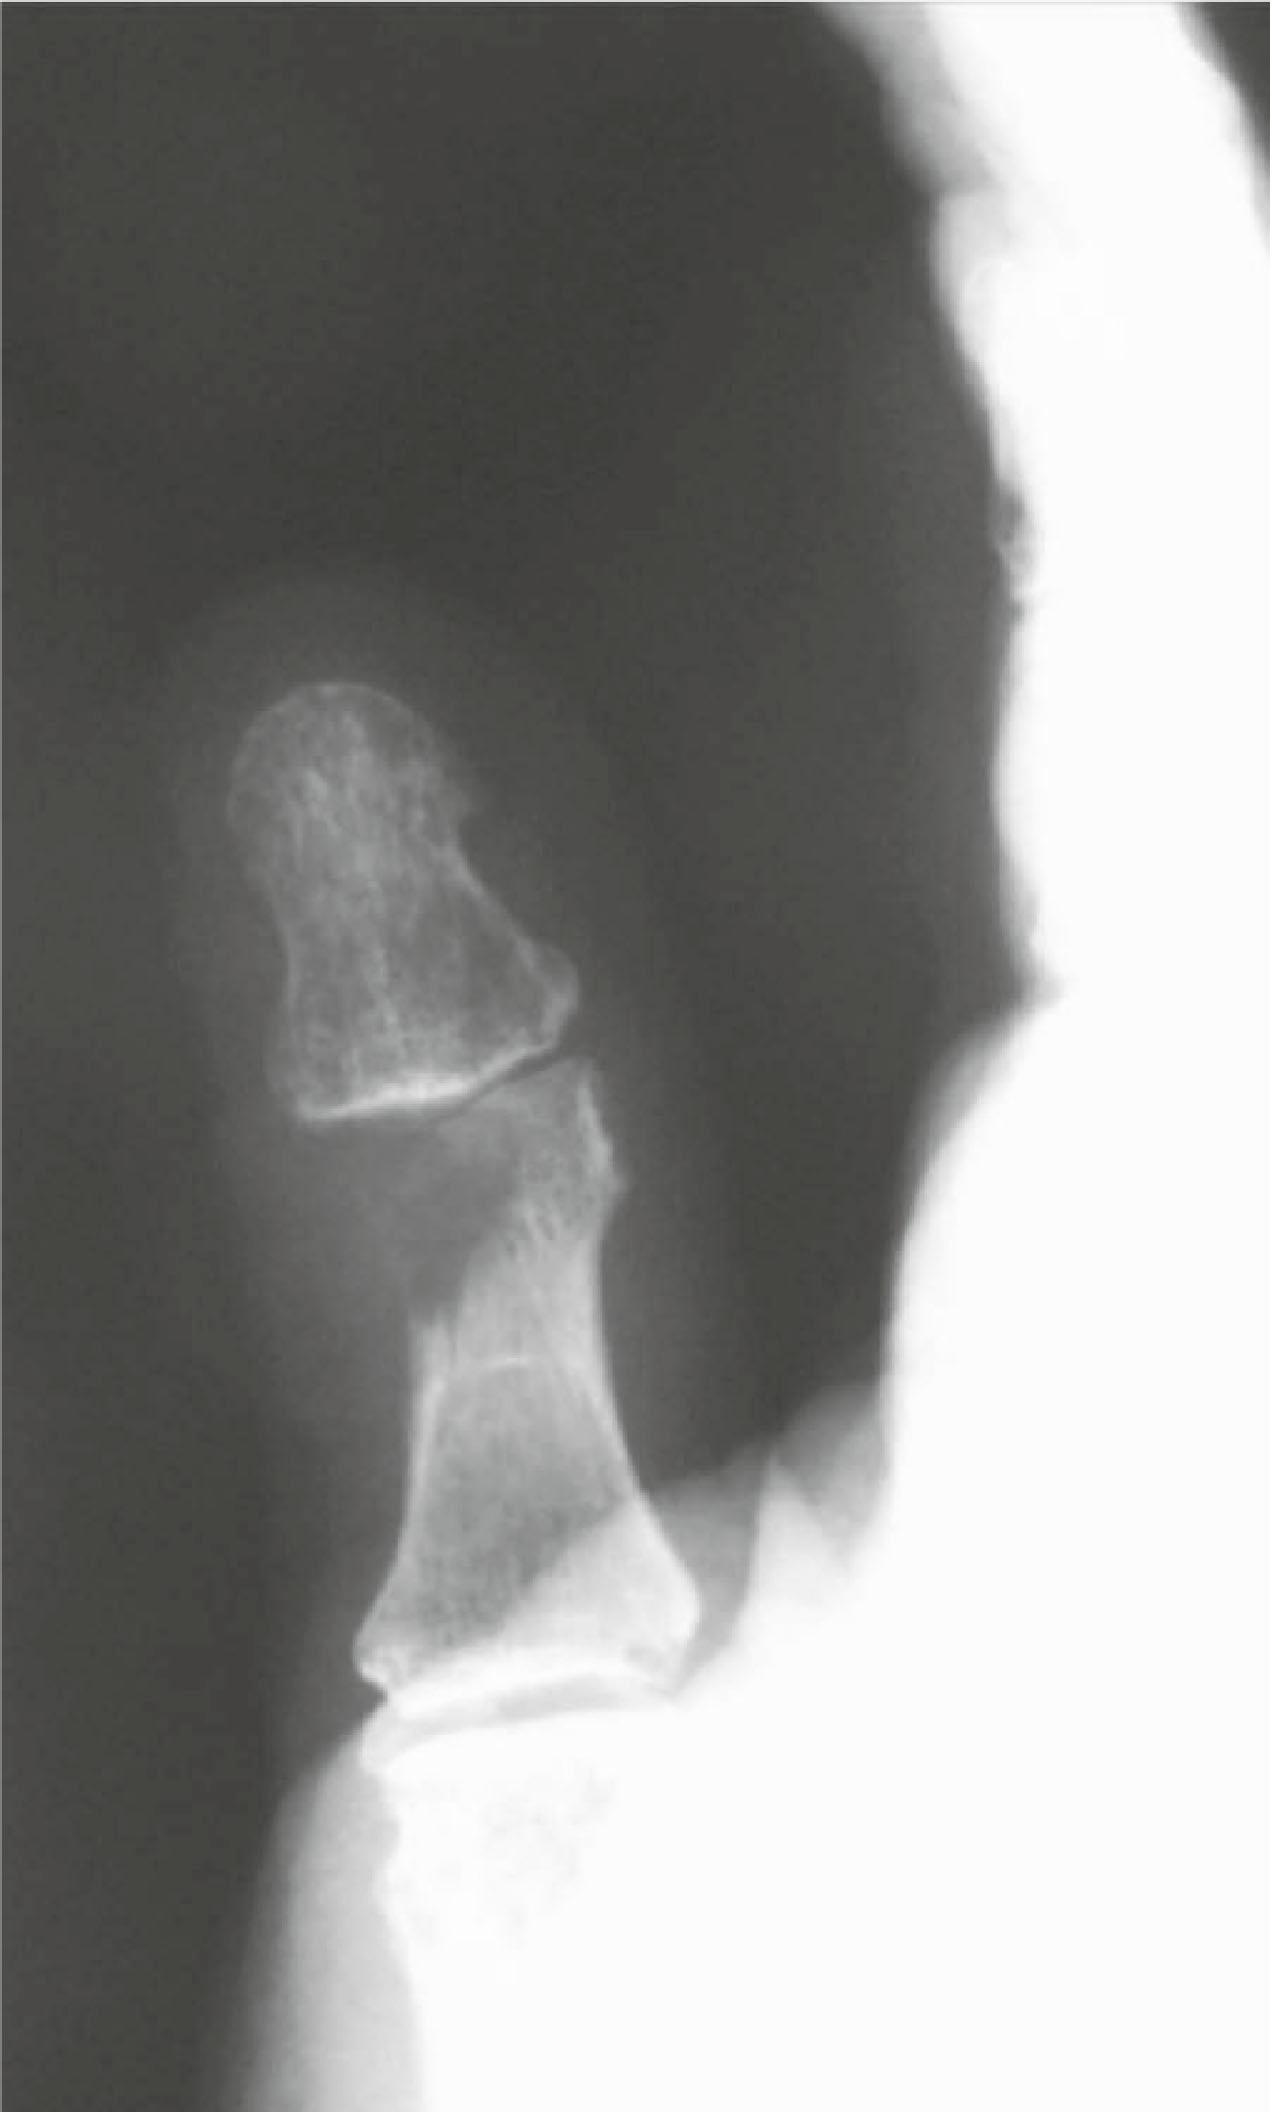 Figure 16.1, In this proximal phalanx lesion of the thumb a destroyed cortex potentially indicates a malignant process.